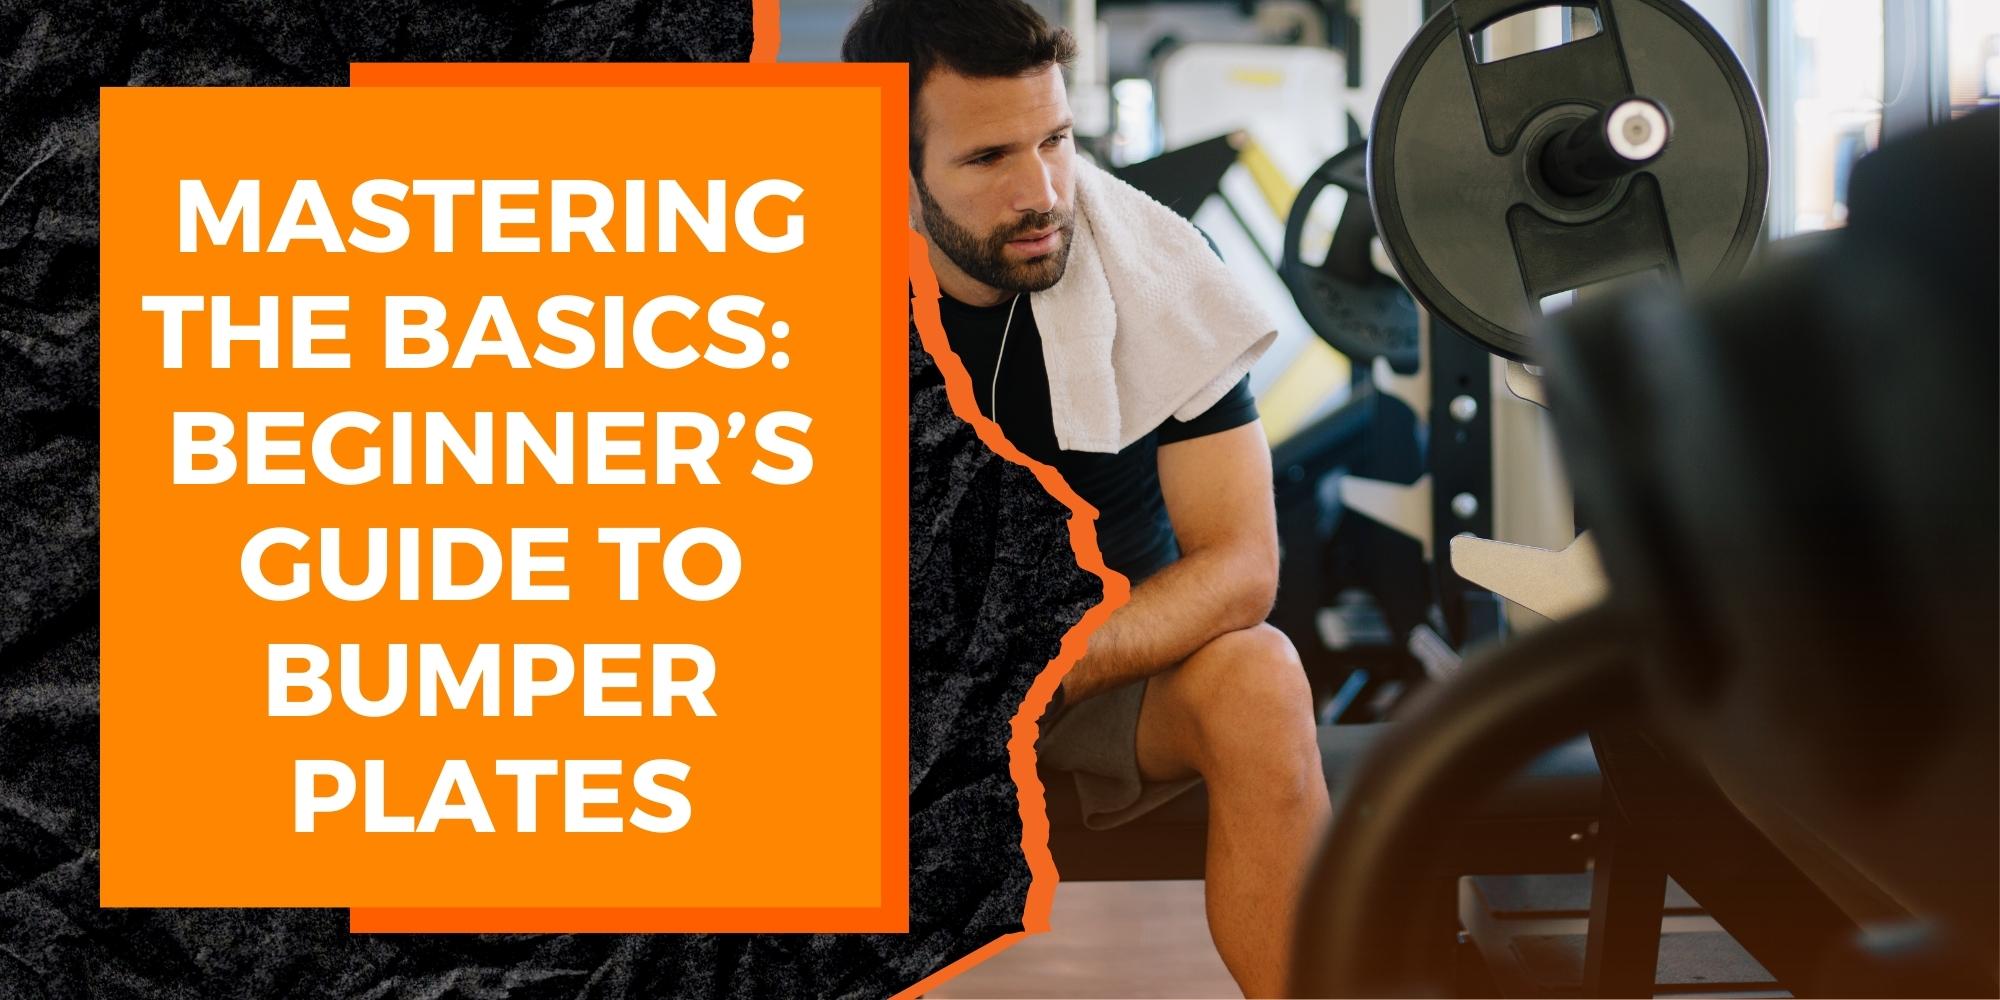 Mastering the Basics: A Beginner’s Guide to Bumper Plates